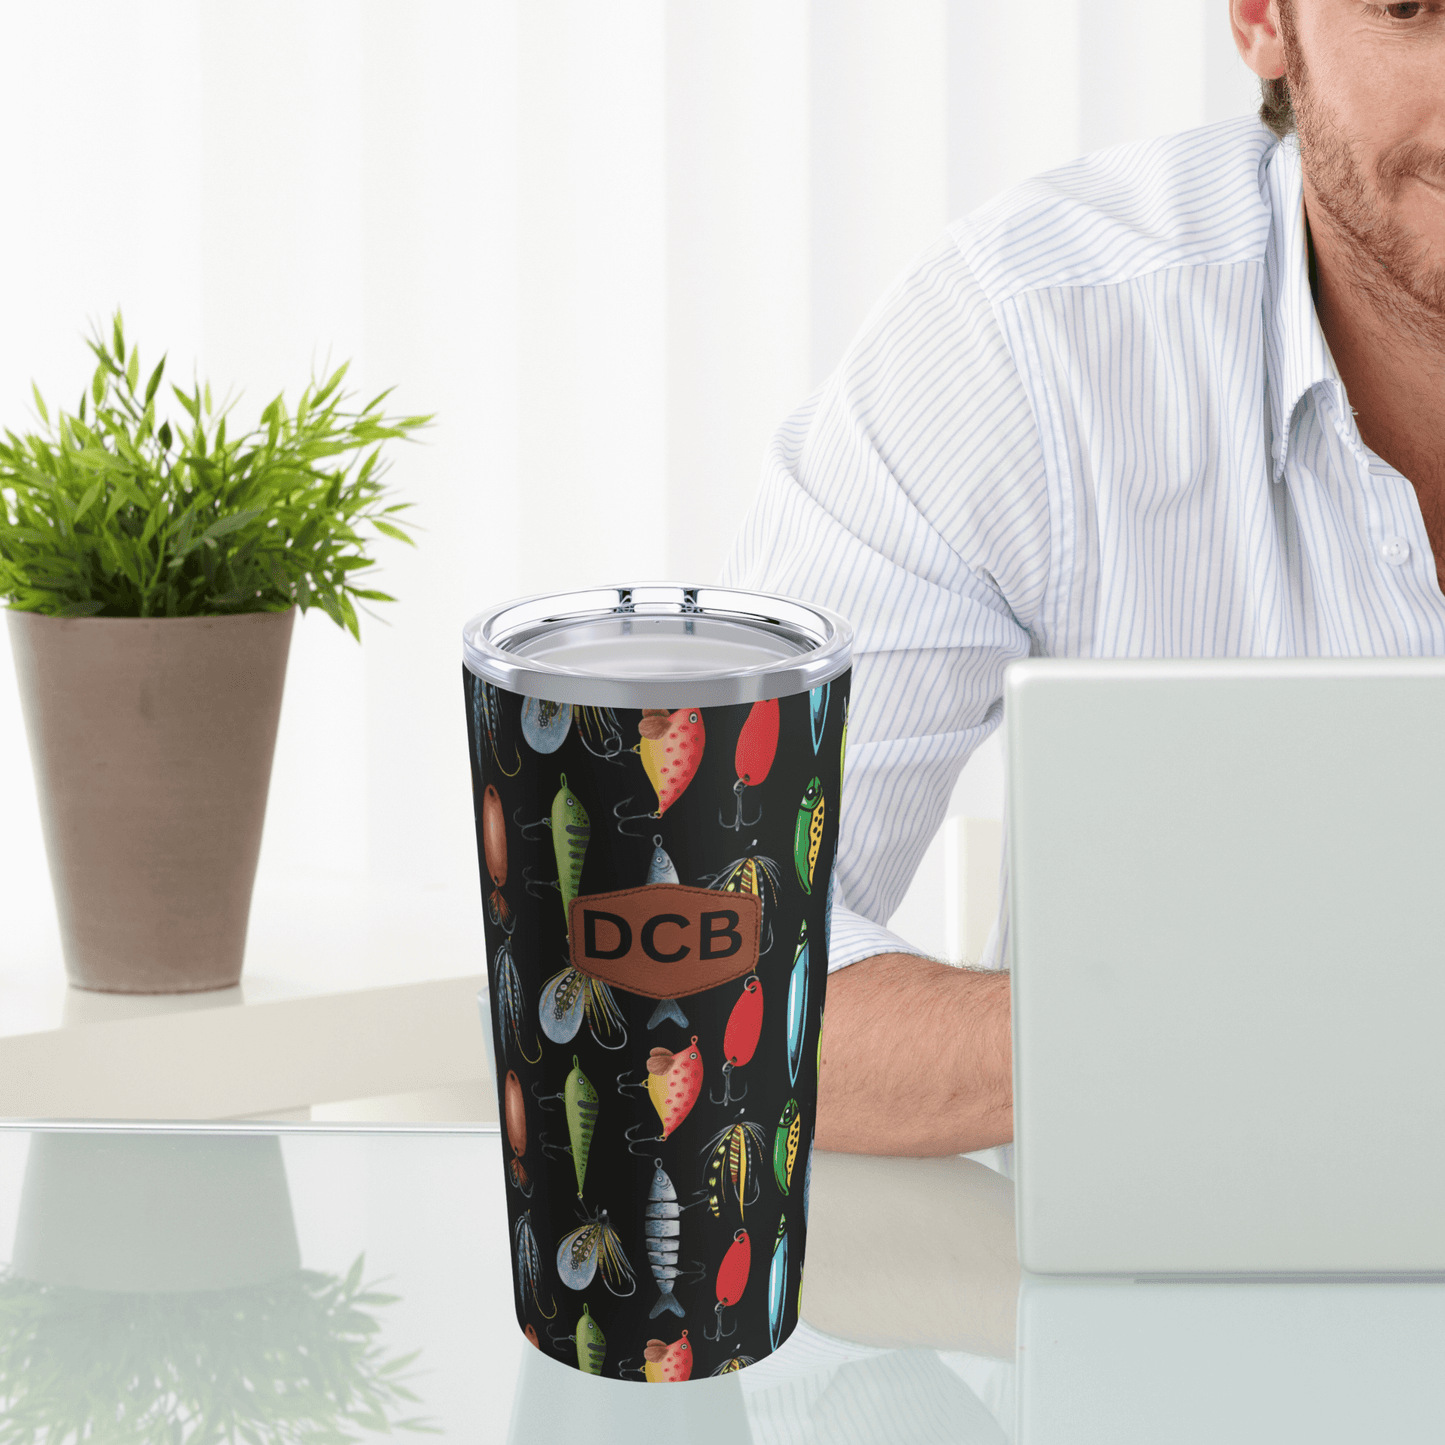 Our fishing travel mug is shown next to a man working on a computer